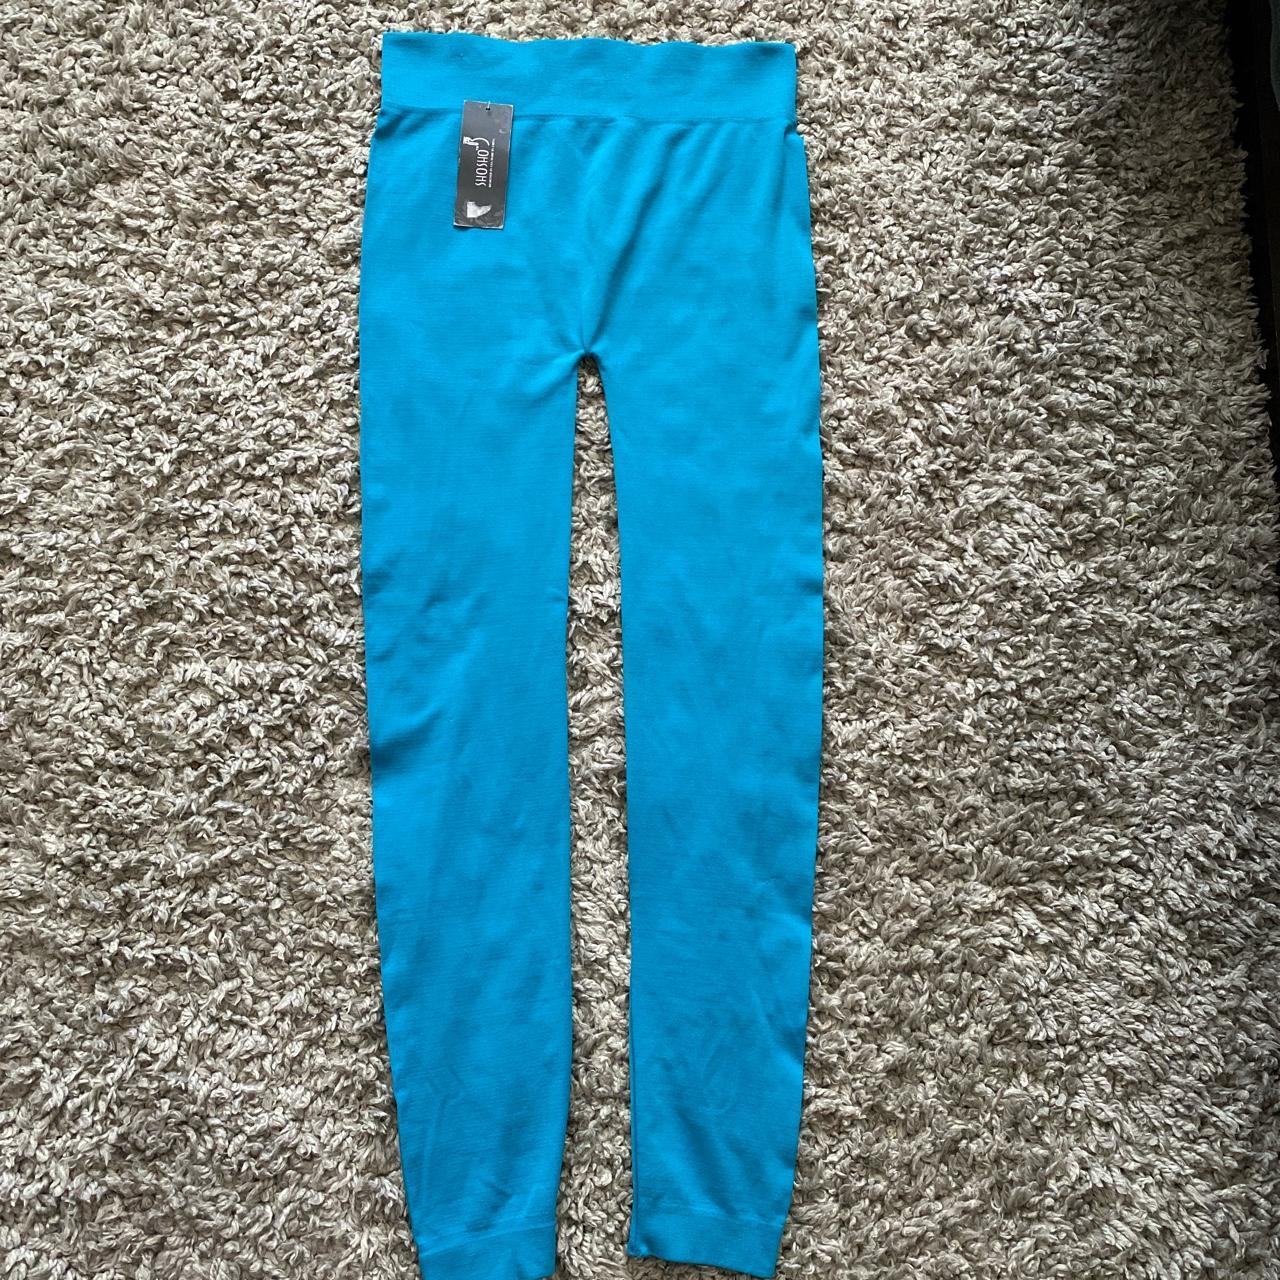 Light blue leggings with tags Brand shosho Size small - Depop